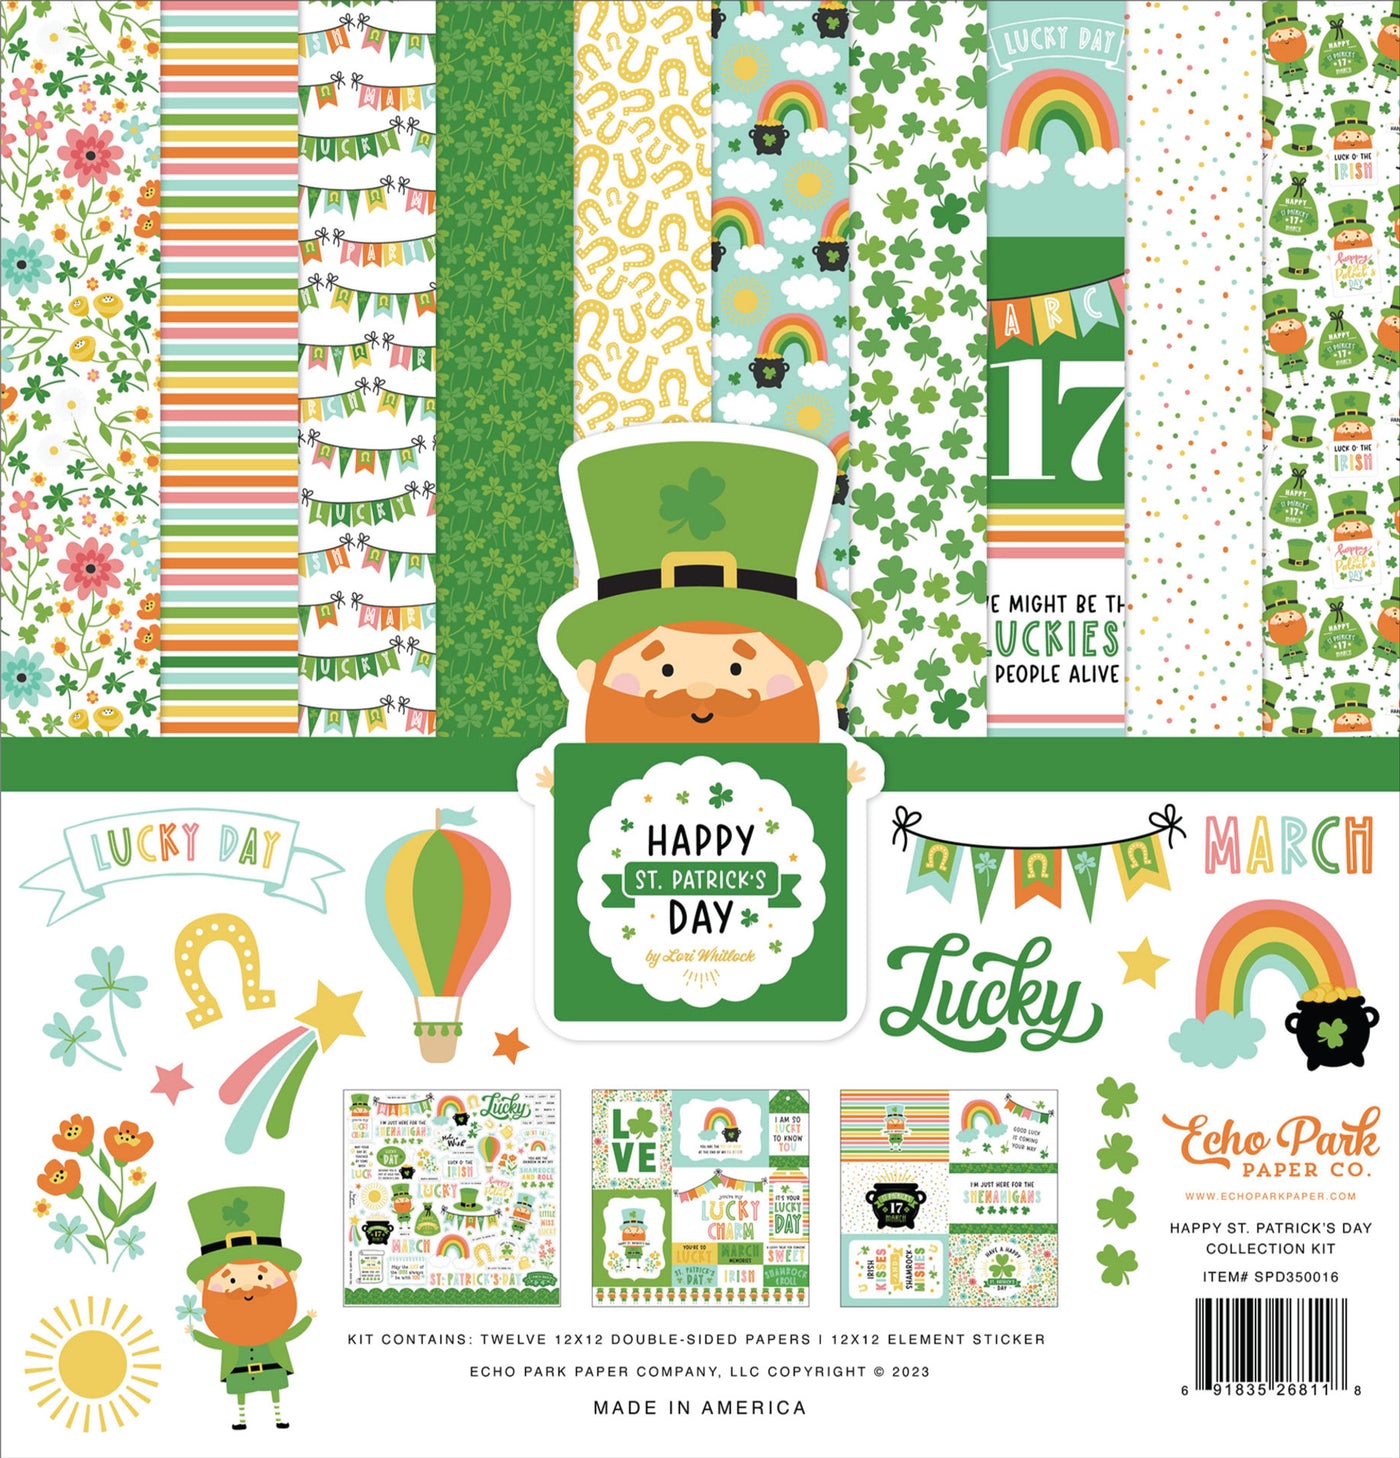 St.Patrick's Day crafts using the St.Patrick's Day Collection 12" x 12" Kit designed by Lori Whitlock for Echo Park. The kit includes 12 double-sided papers with designs of shamrocks, stripes, flowers, rainbows, banners, and more. Also included is one Element sticker sheet.